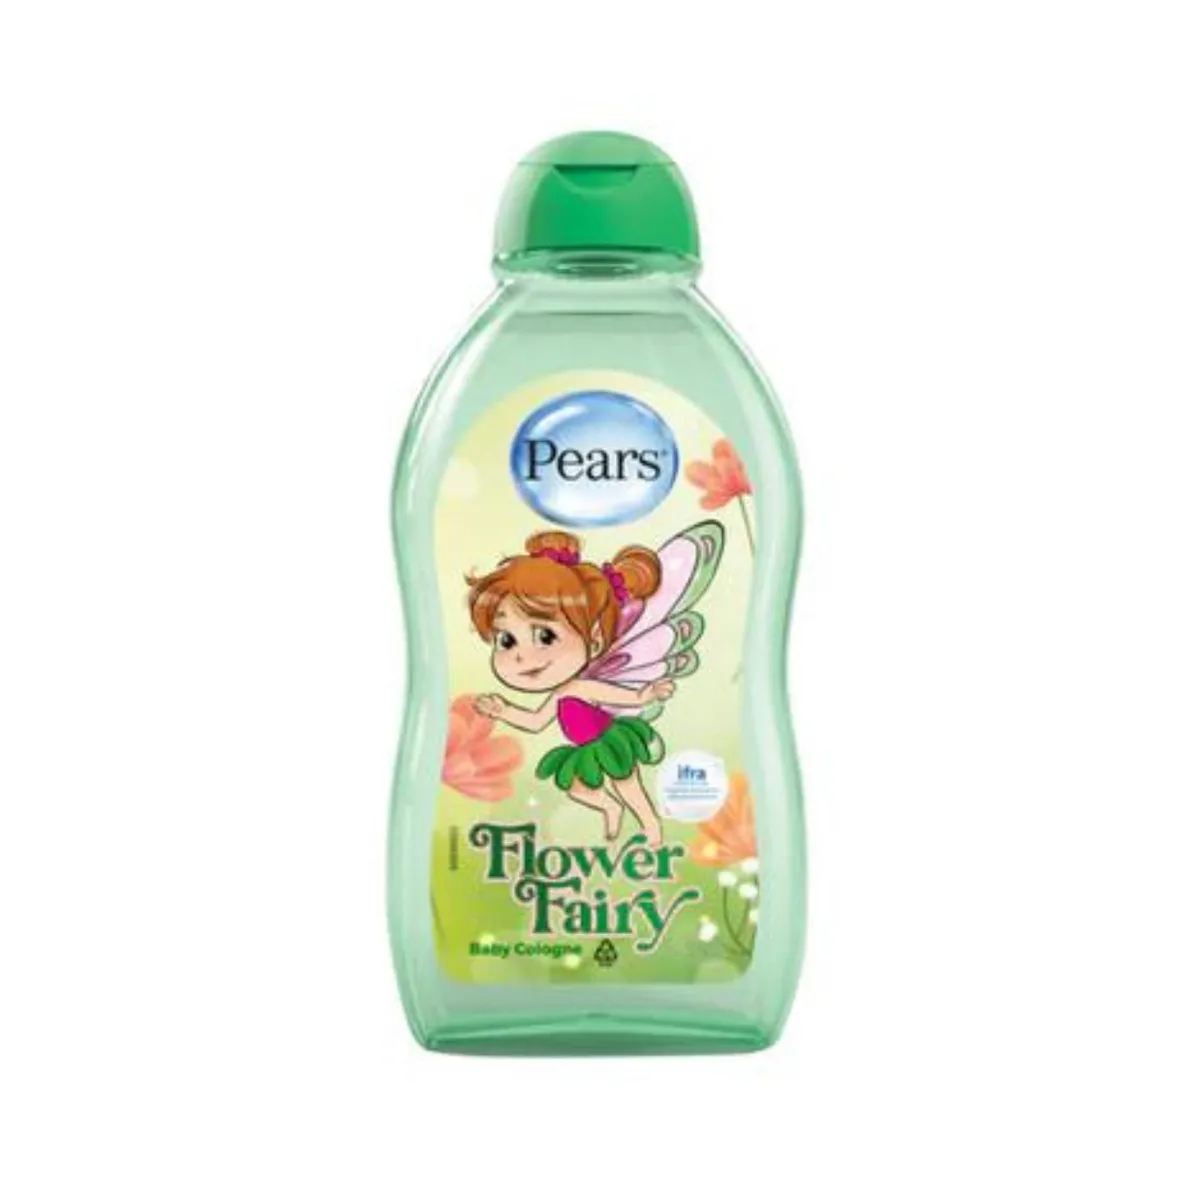 First product image of Pears Flower Fairy Baby Cologne 100ml